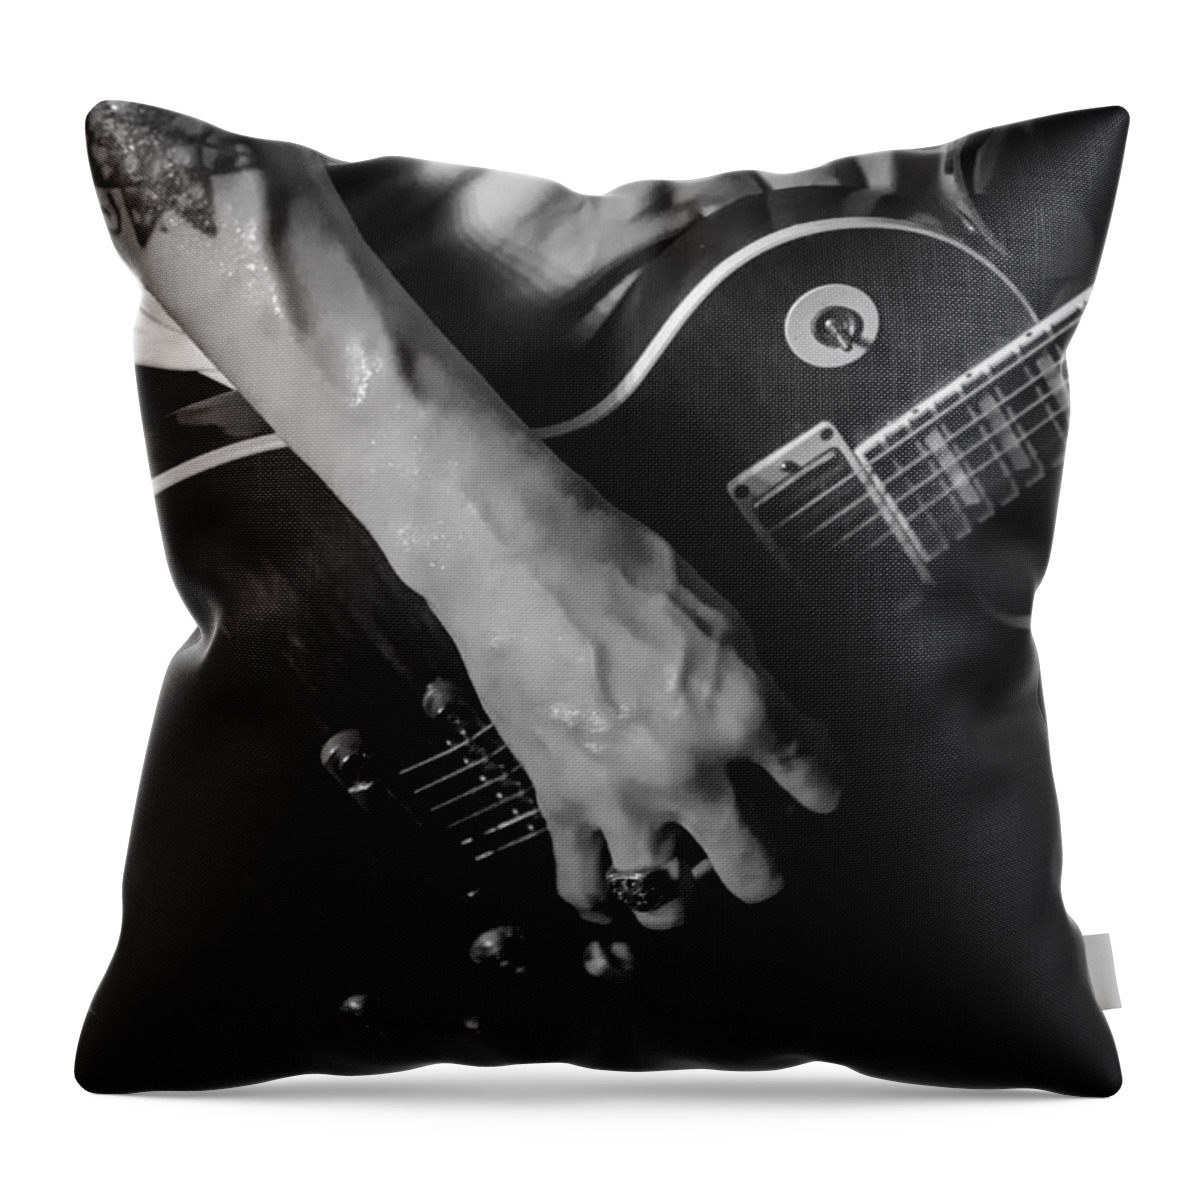 Guitar Throw Pillow featuring the photograph Rock On by David Morefield